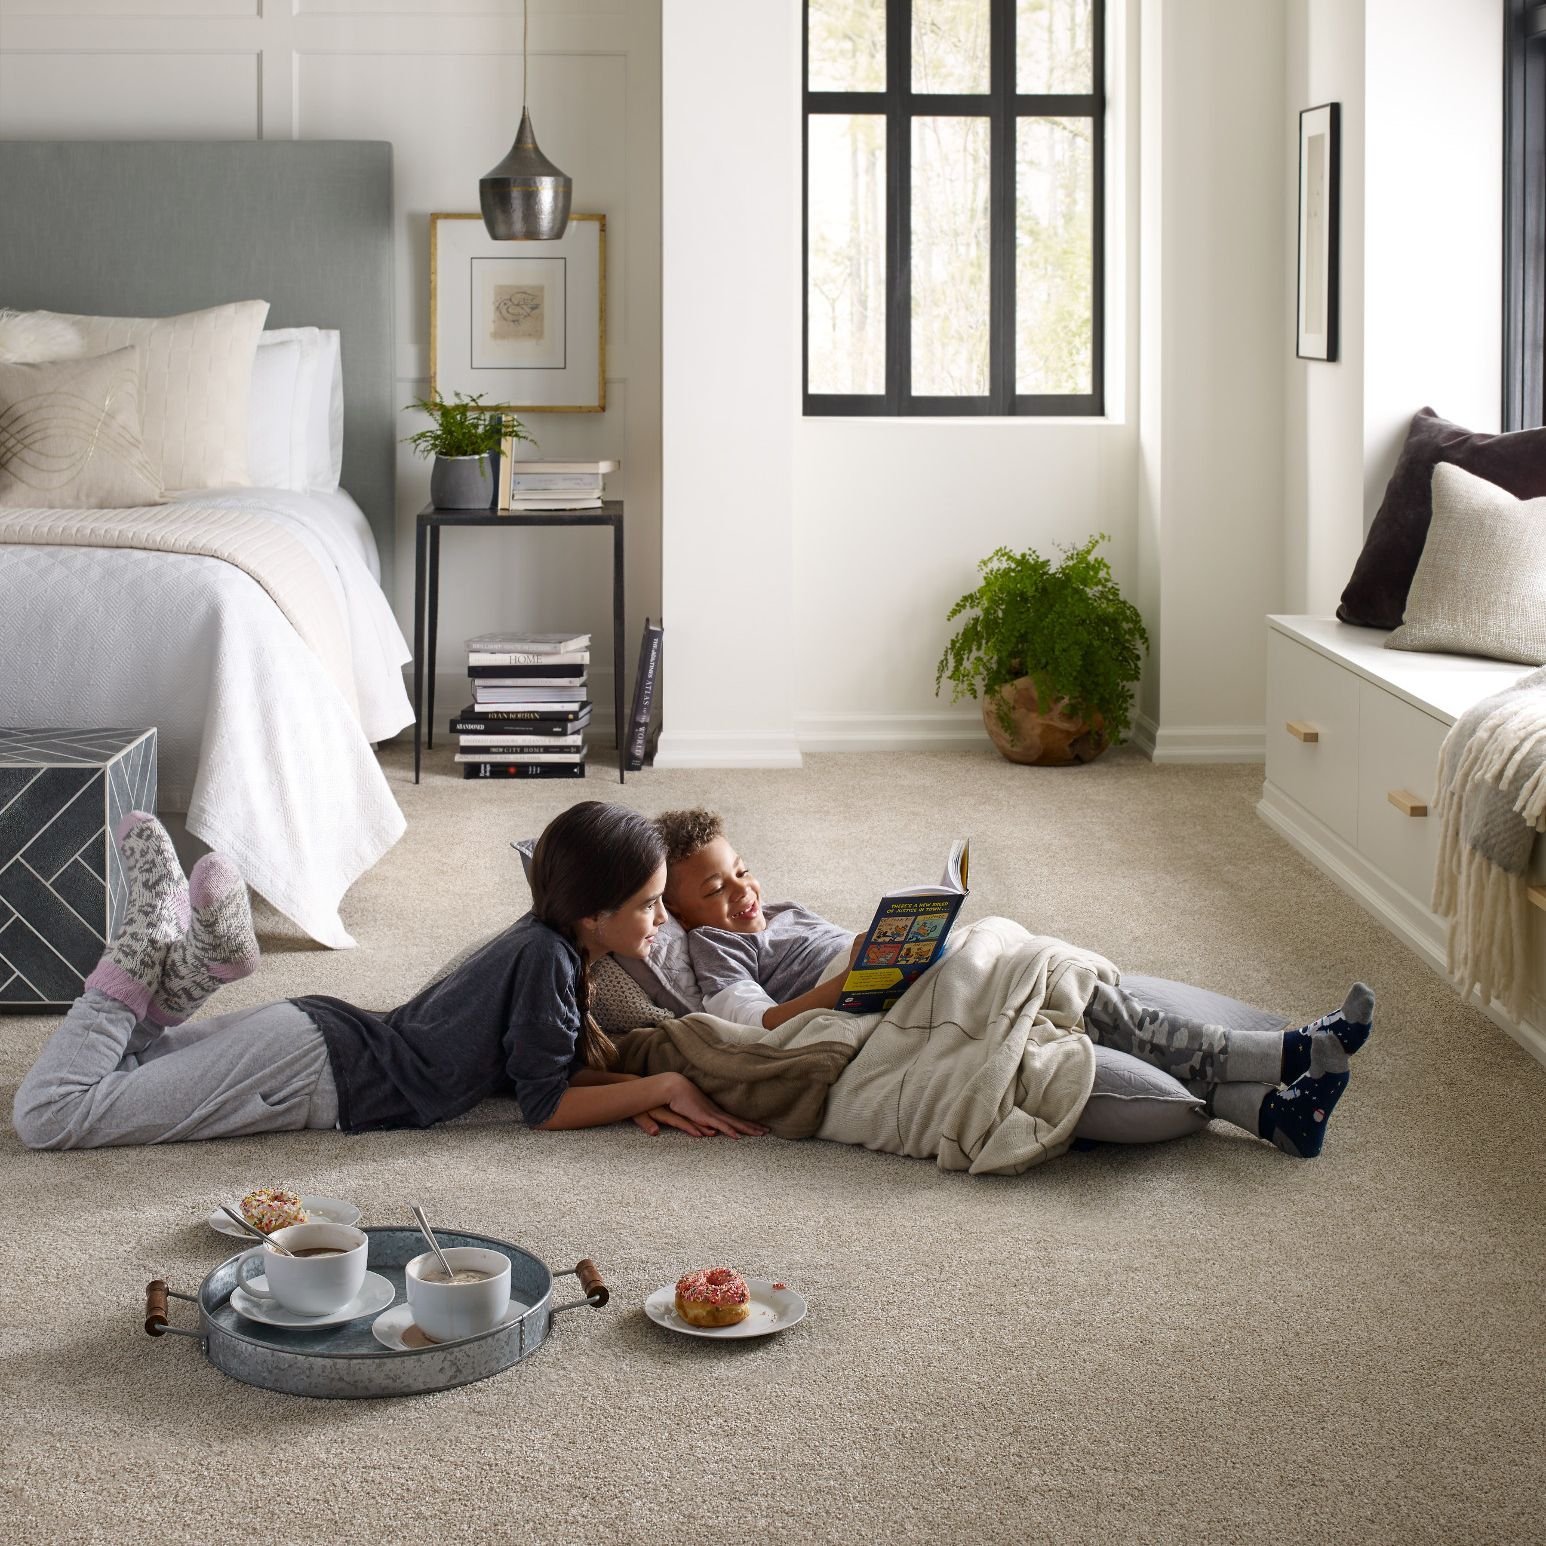 Kids reading in bedroom on a soft carpet from Dishman Flooring on Houma, LA area